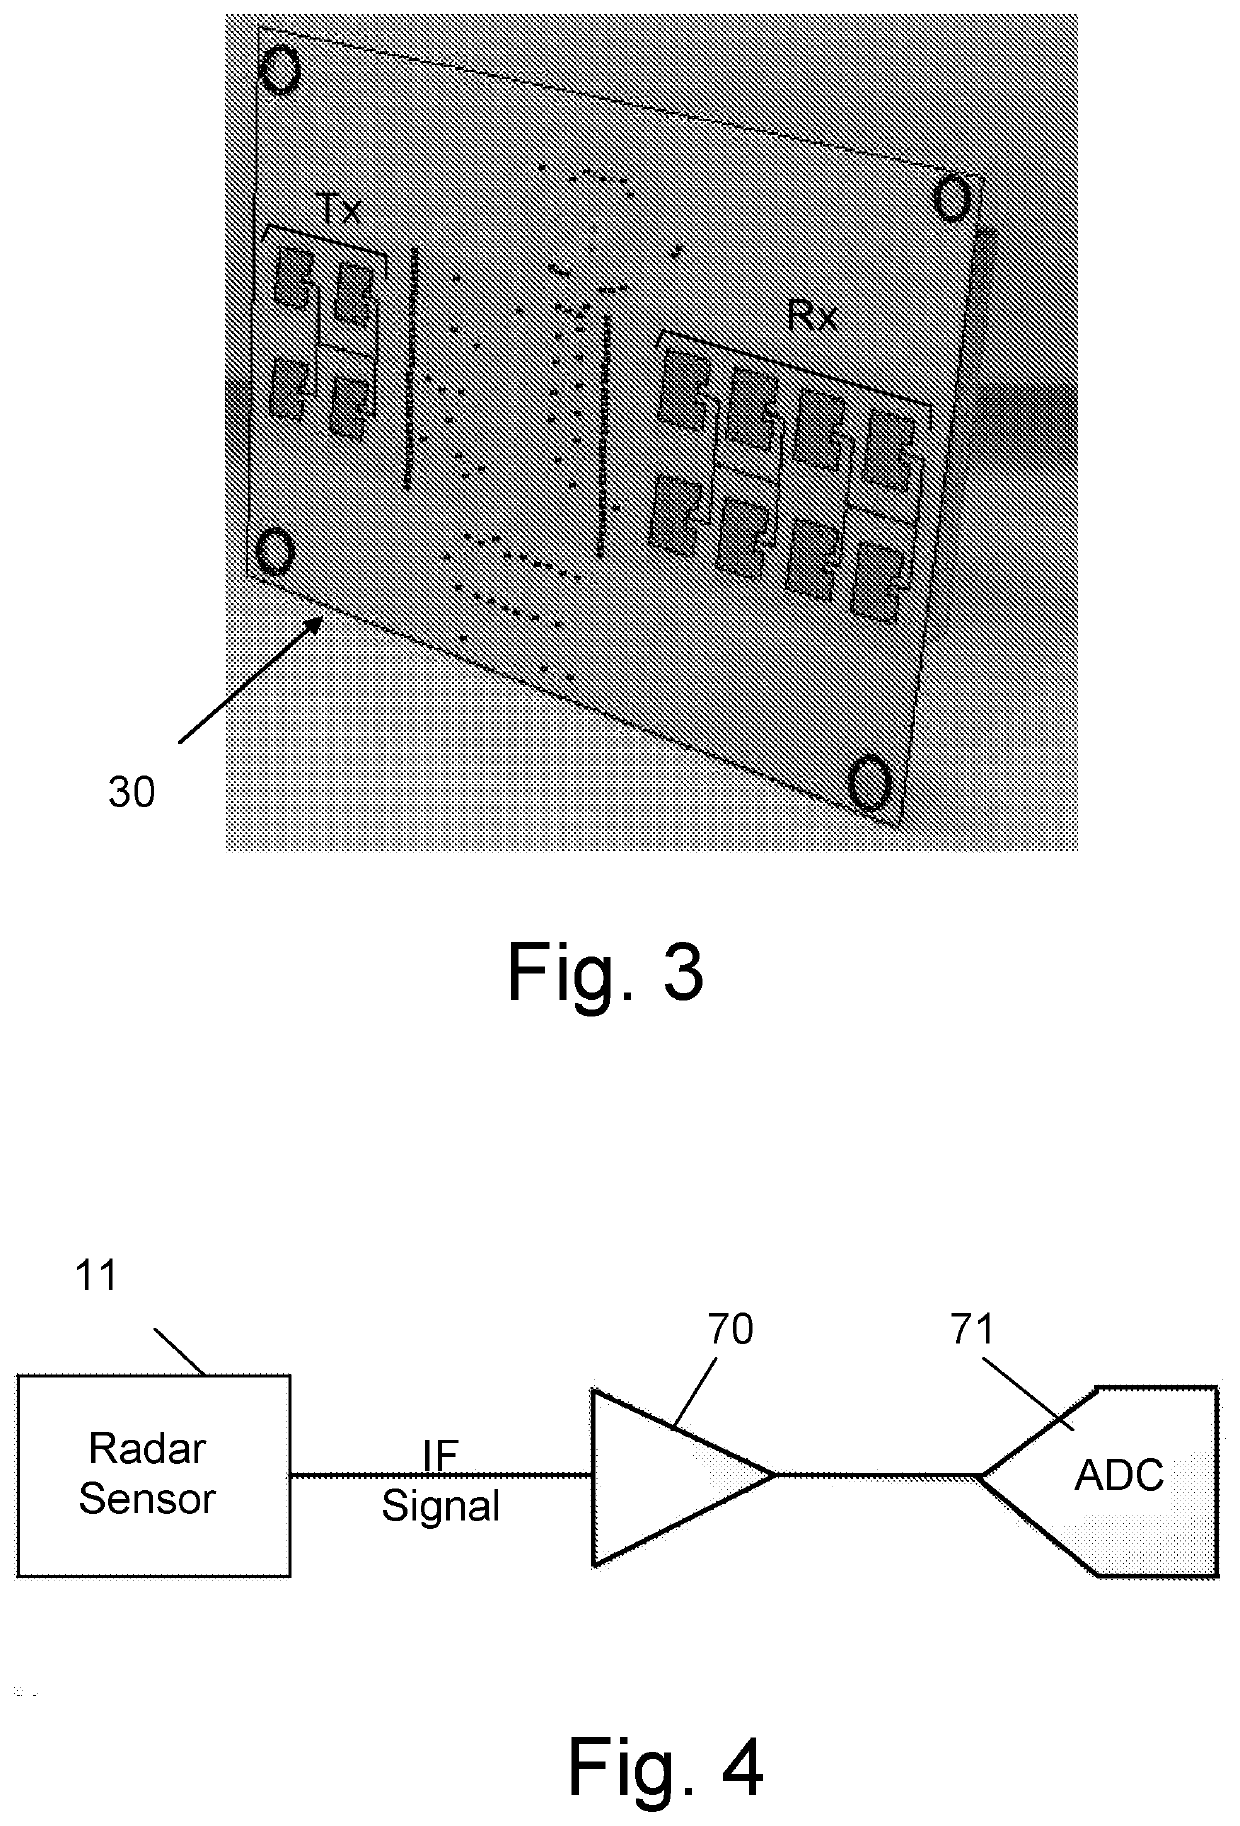 Radar-based system and method for real-time simultaneous localization and mapping